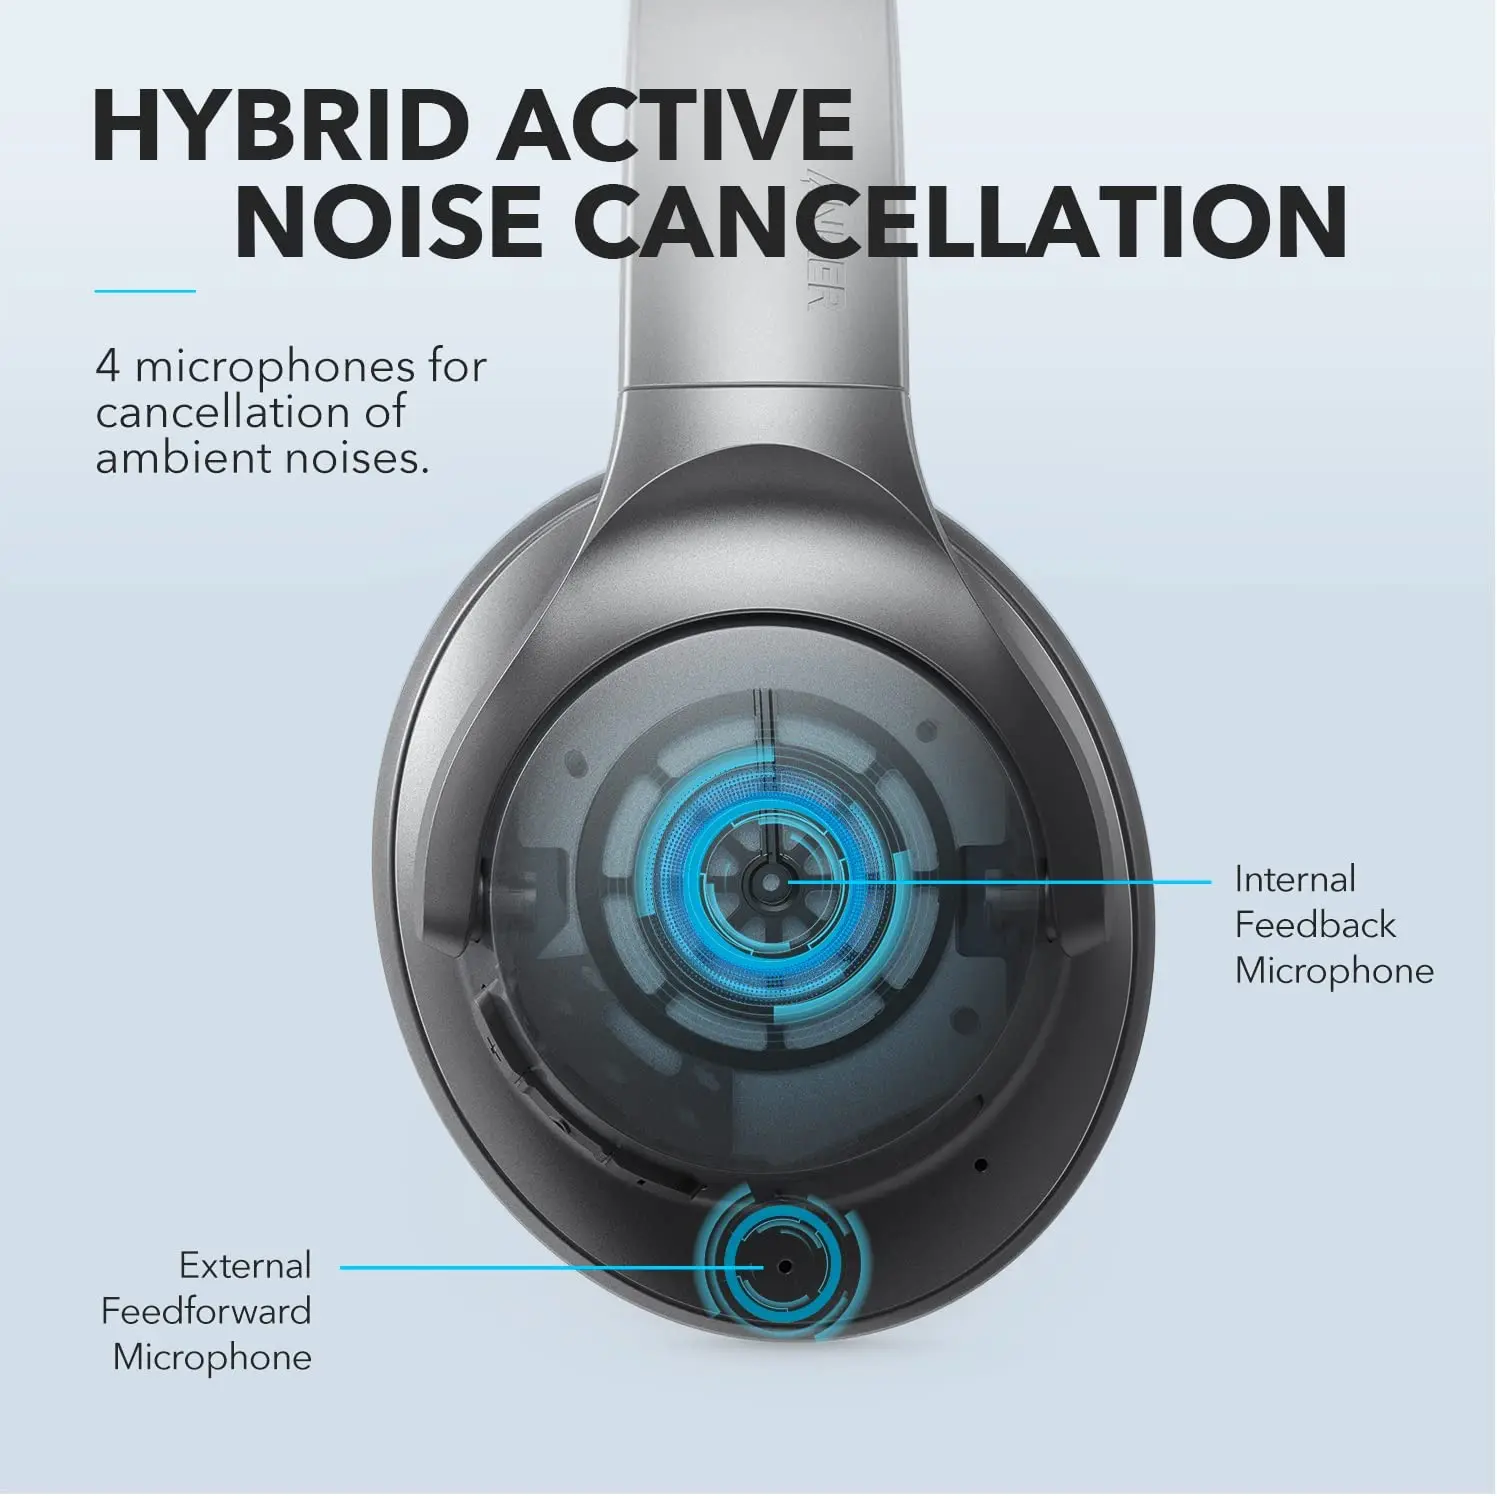 Anker Soundcore Life Q20 Hybrid Active Noise Cancelling Headphones, Wireless Over Ear Bluetooth Headphones images - 6